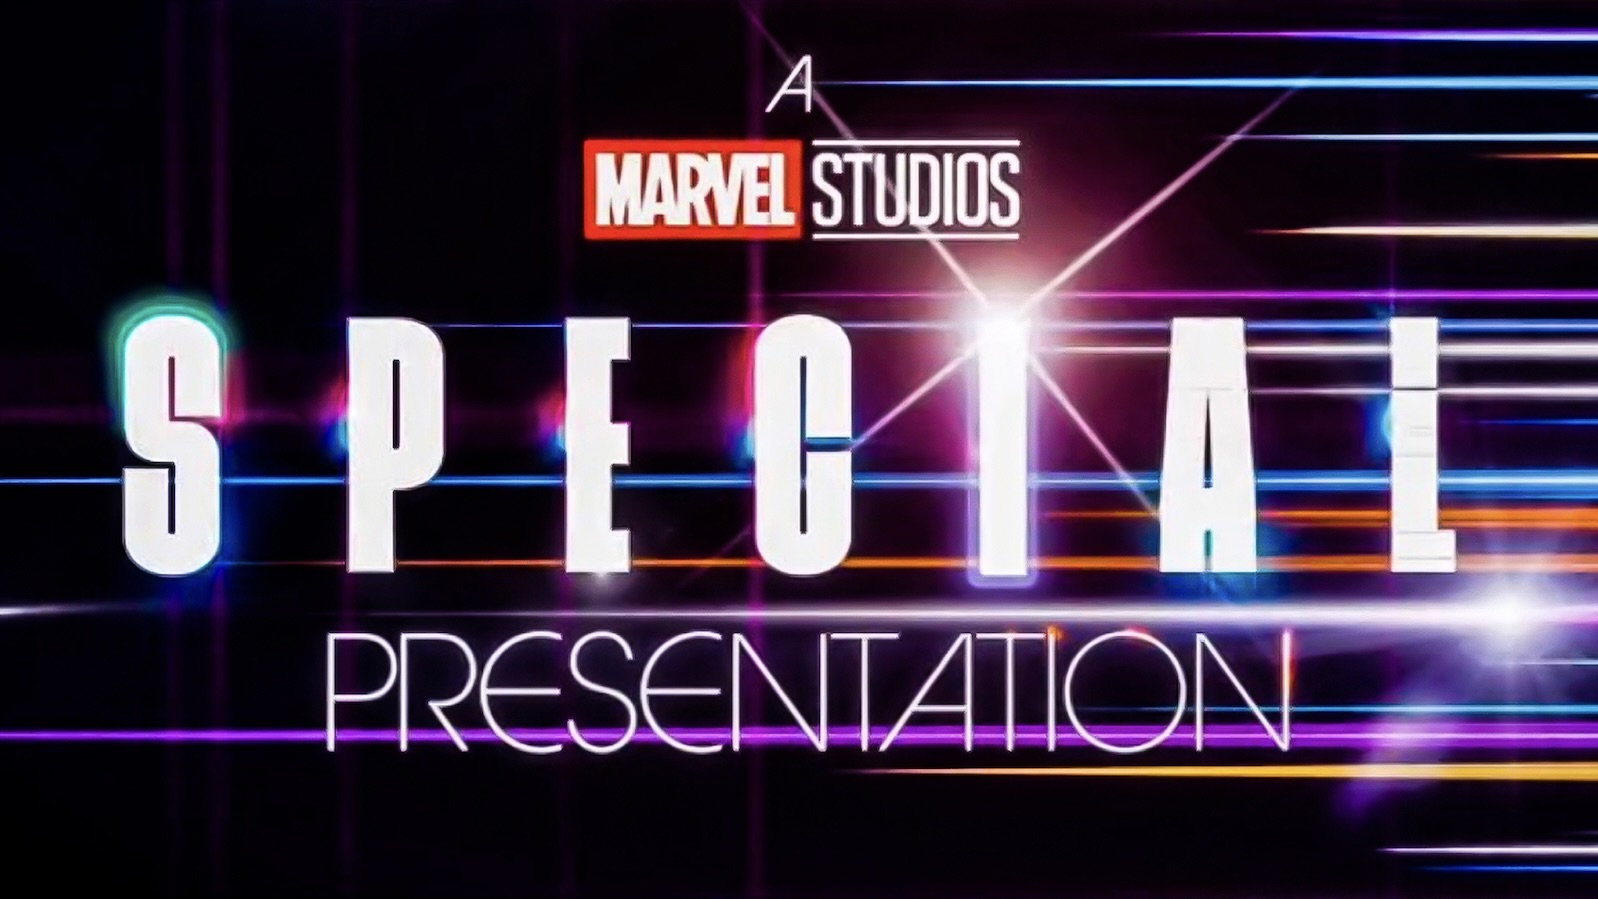 Marvel’s Second Special Presentation May Feature This Galactic Hero